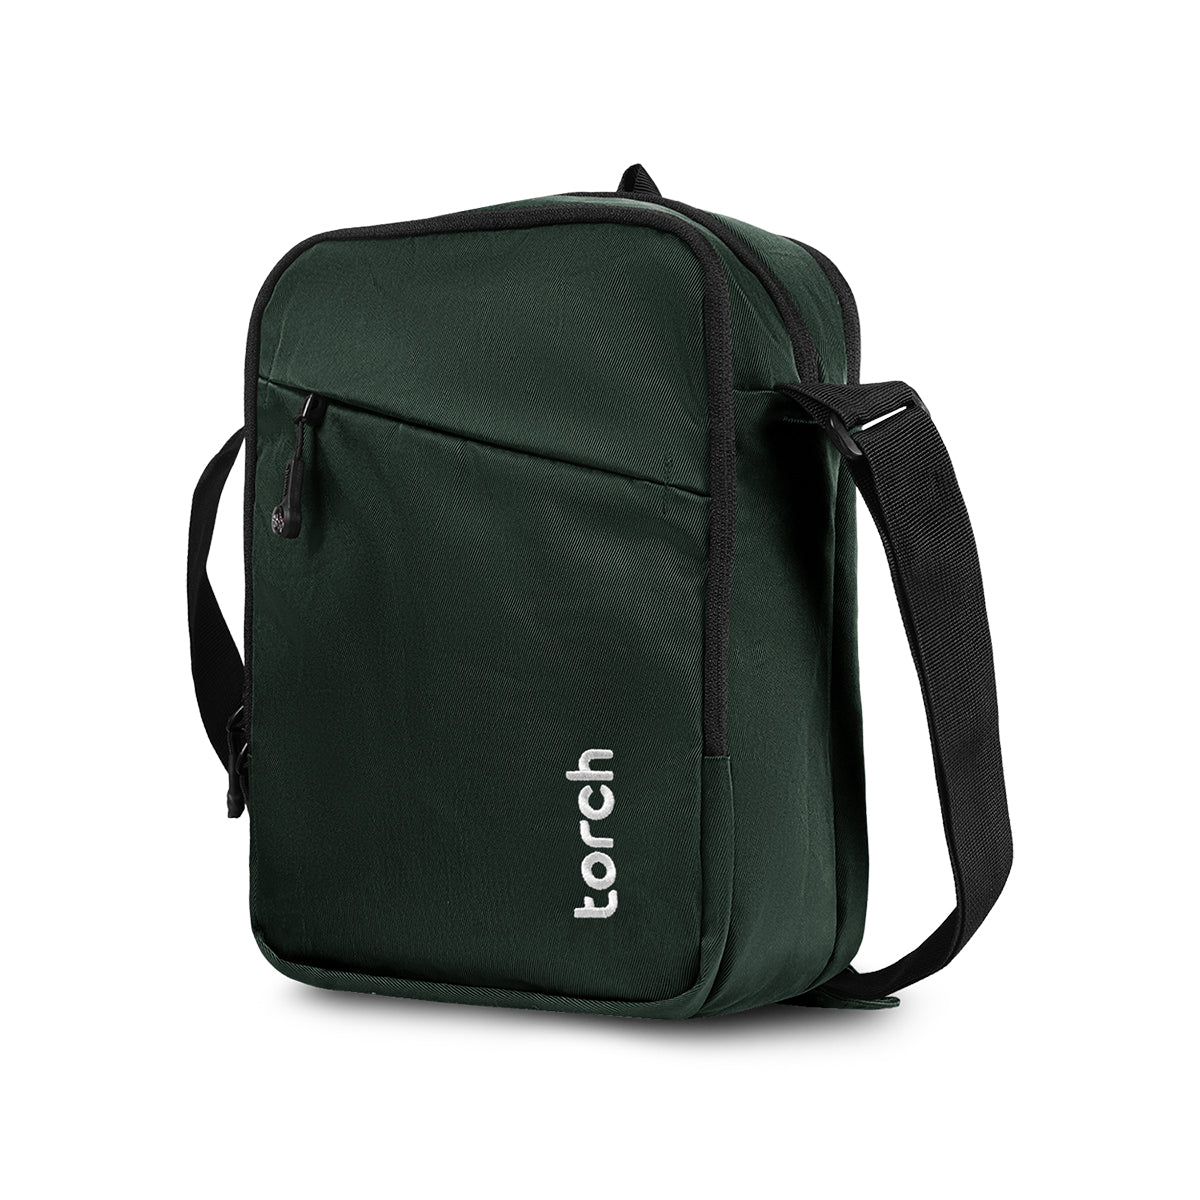 Sayung Travel Pouch